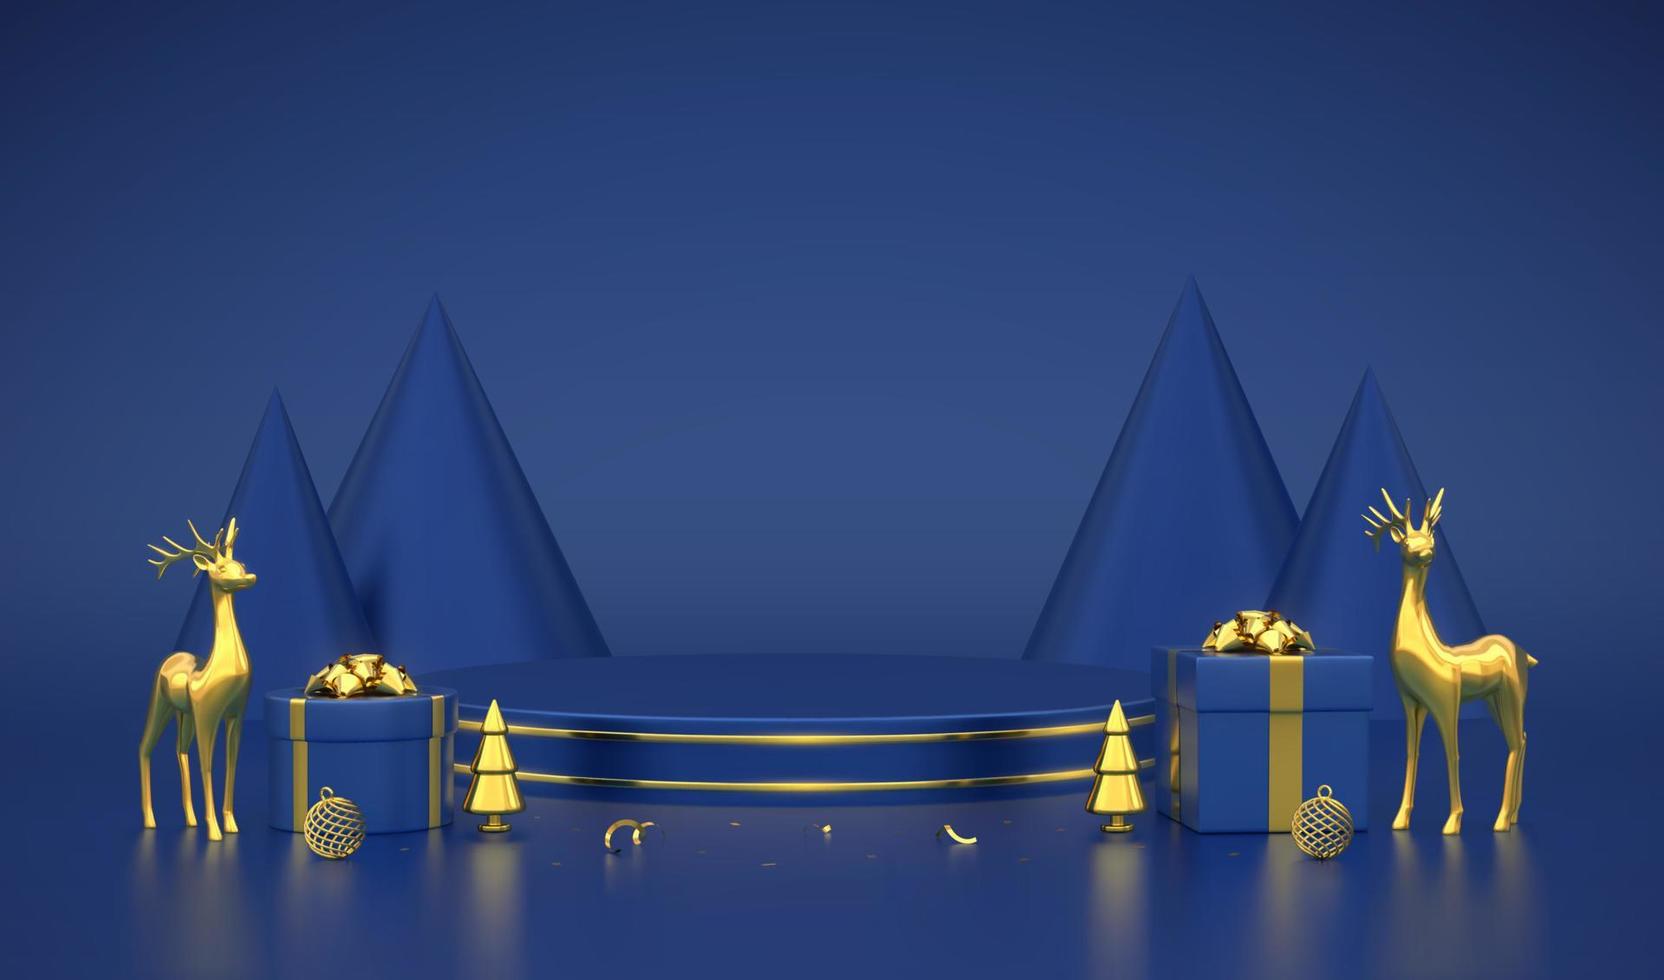 Blue round podium. Christmas Scene and 3D platform on blue background. Blank Pedestal with gift boxes, golden deers, shining balls, gold metallic pine, cone shape spruce trees. Vector illustration.